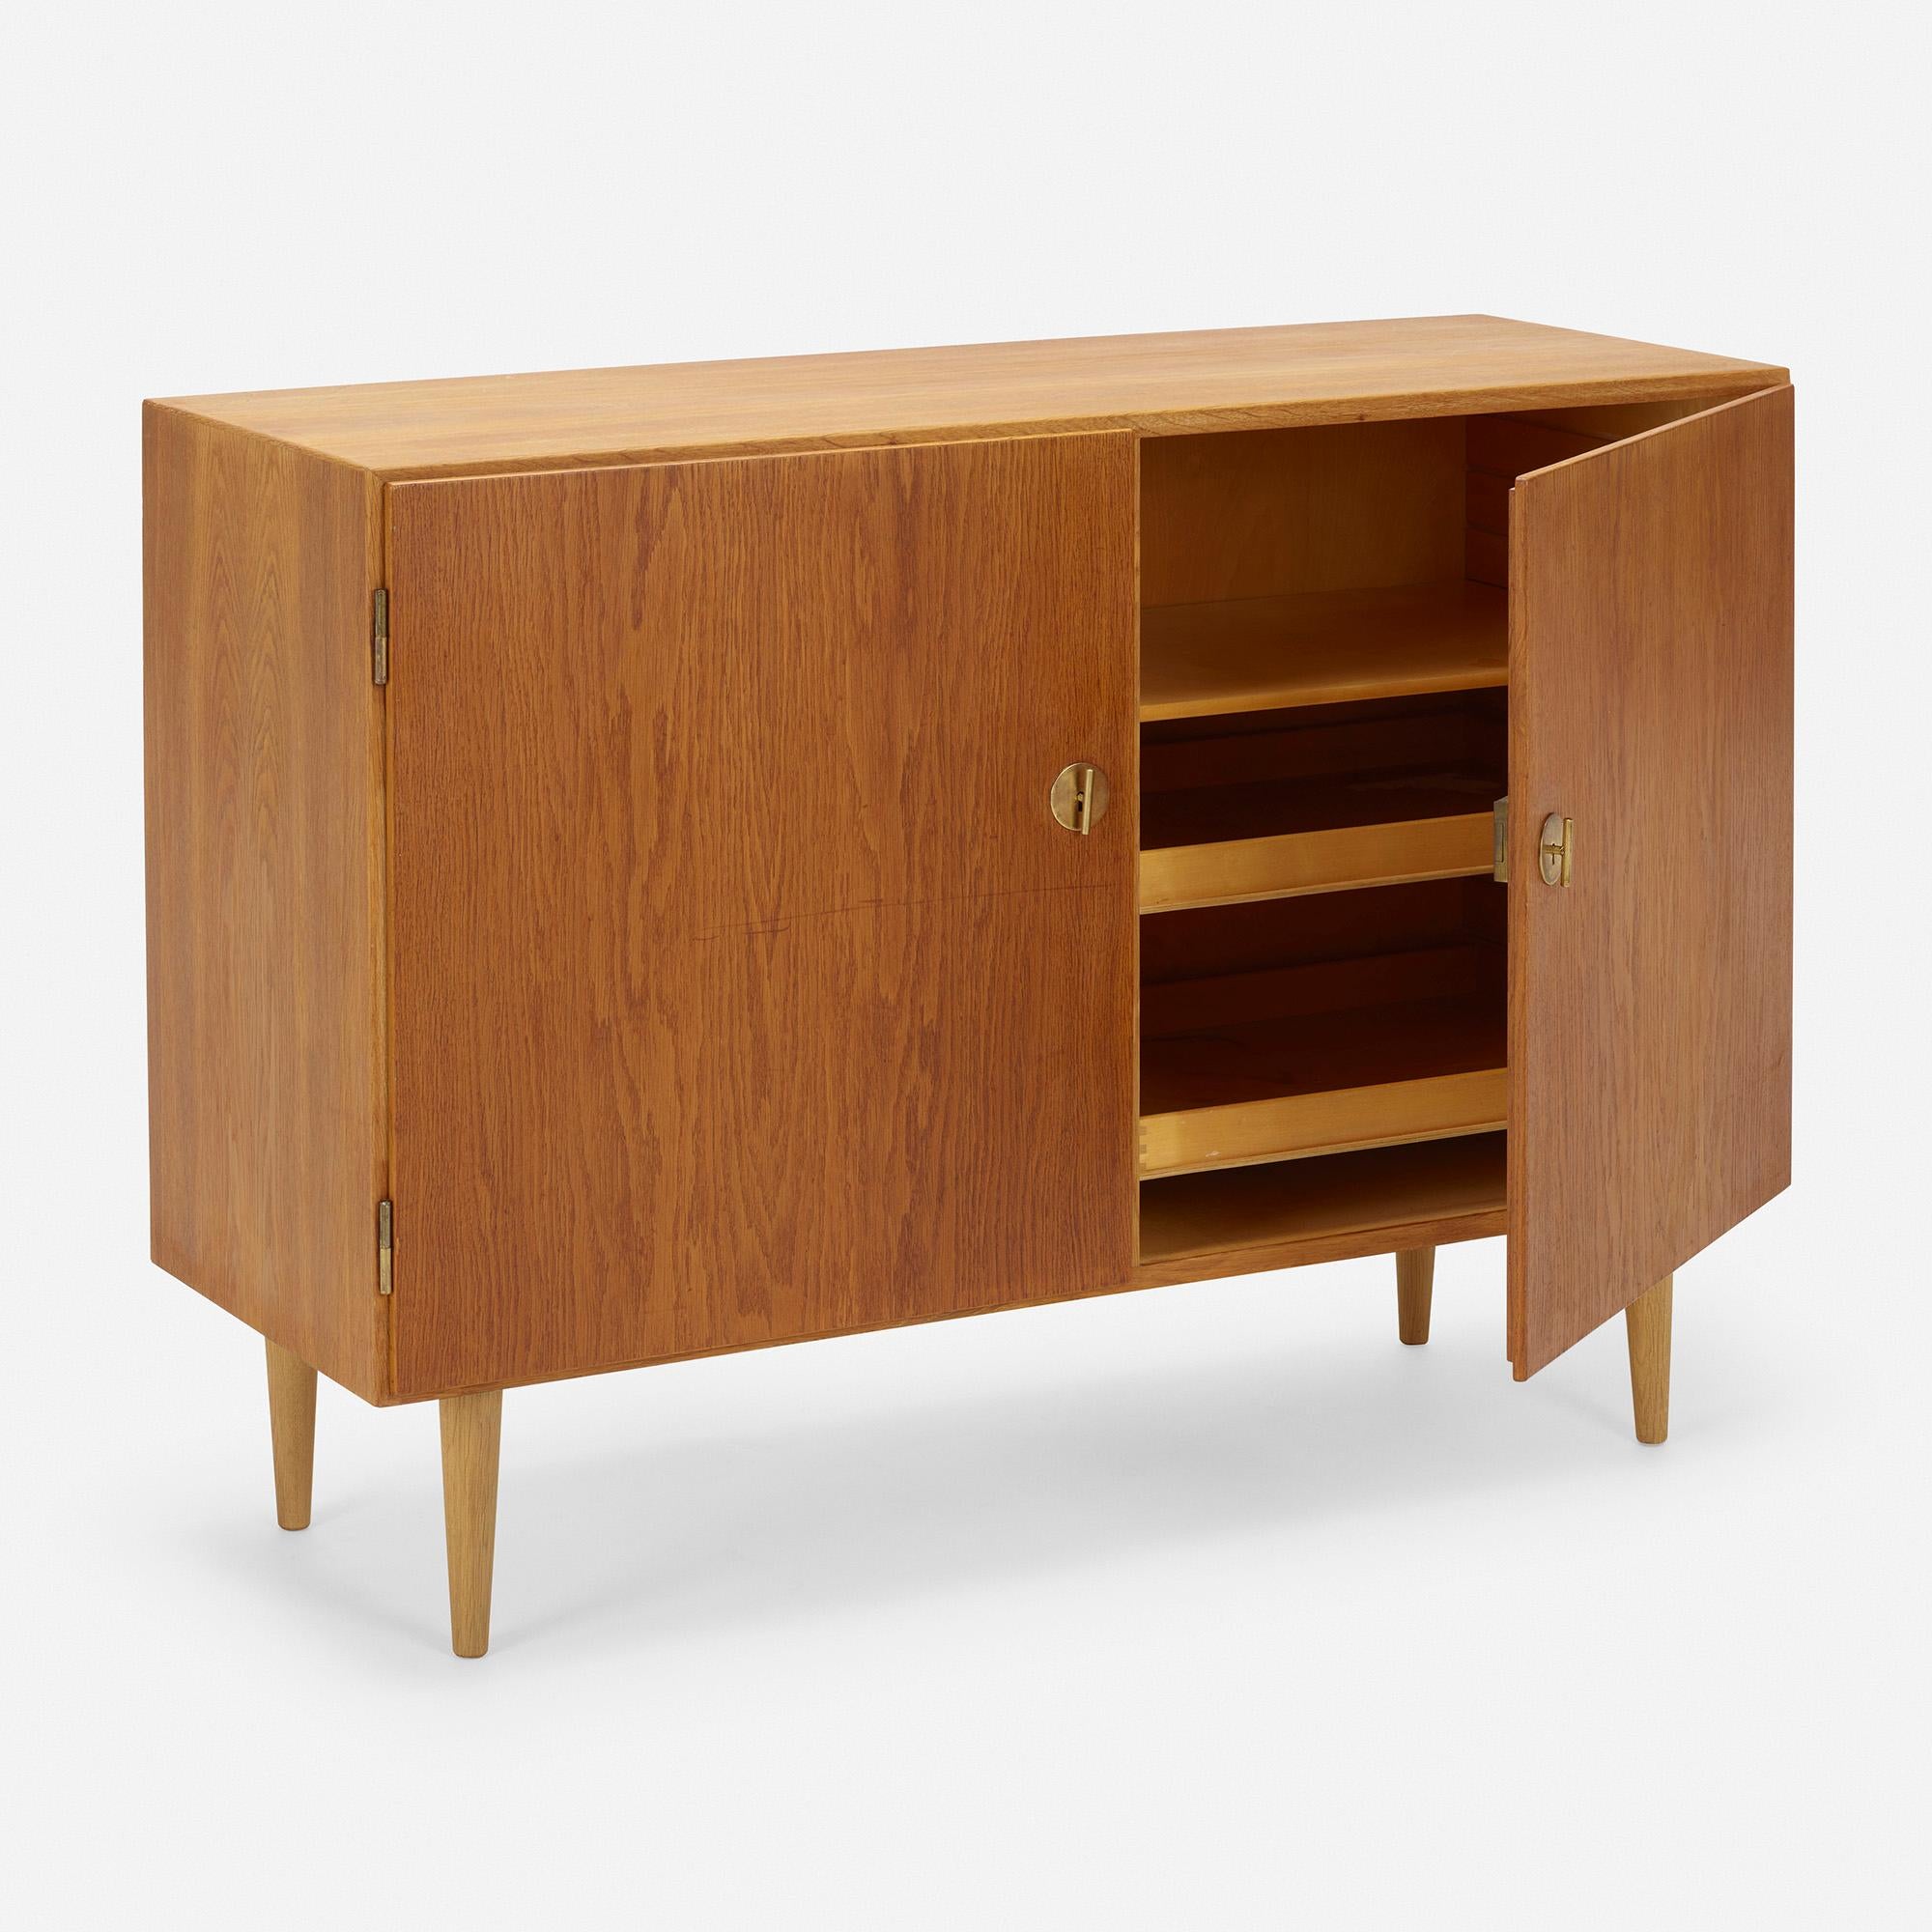 Made by: C.M. Madsens Fabrikker for FDB Møbler, Denmark, c. 1945

Material: oak, brass

Size: 48 w × 18.25 d × 34.5 h in

Description: Cabinet features two doors concealing adjustable shelving and drawers. Sold with a total of four drawers and two